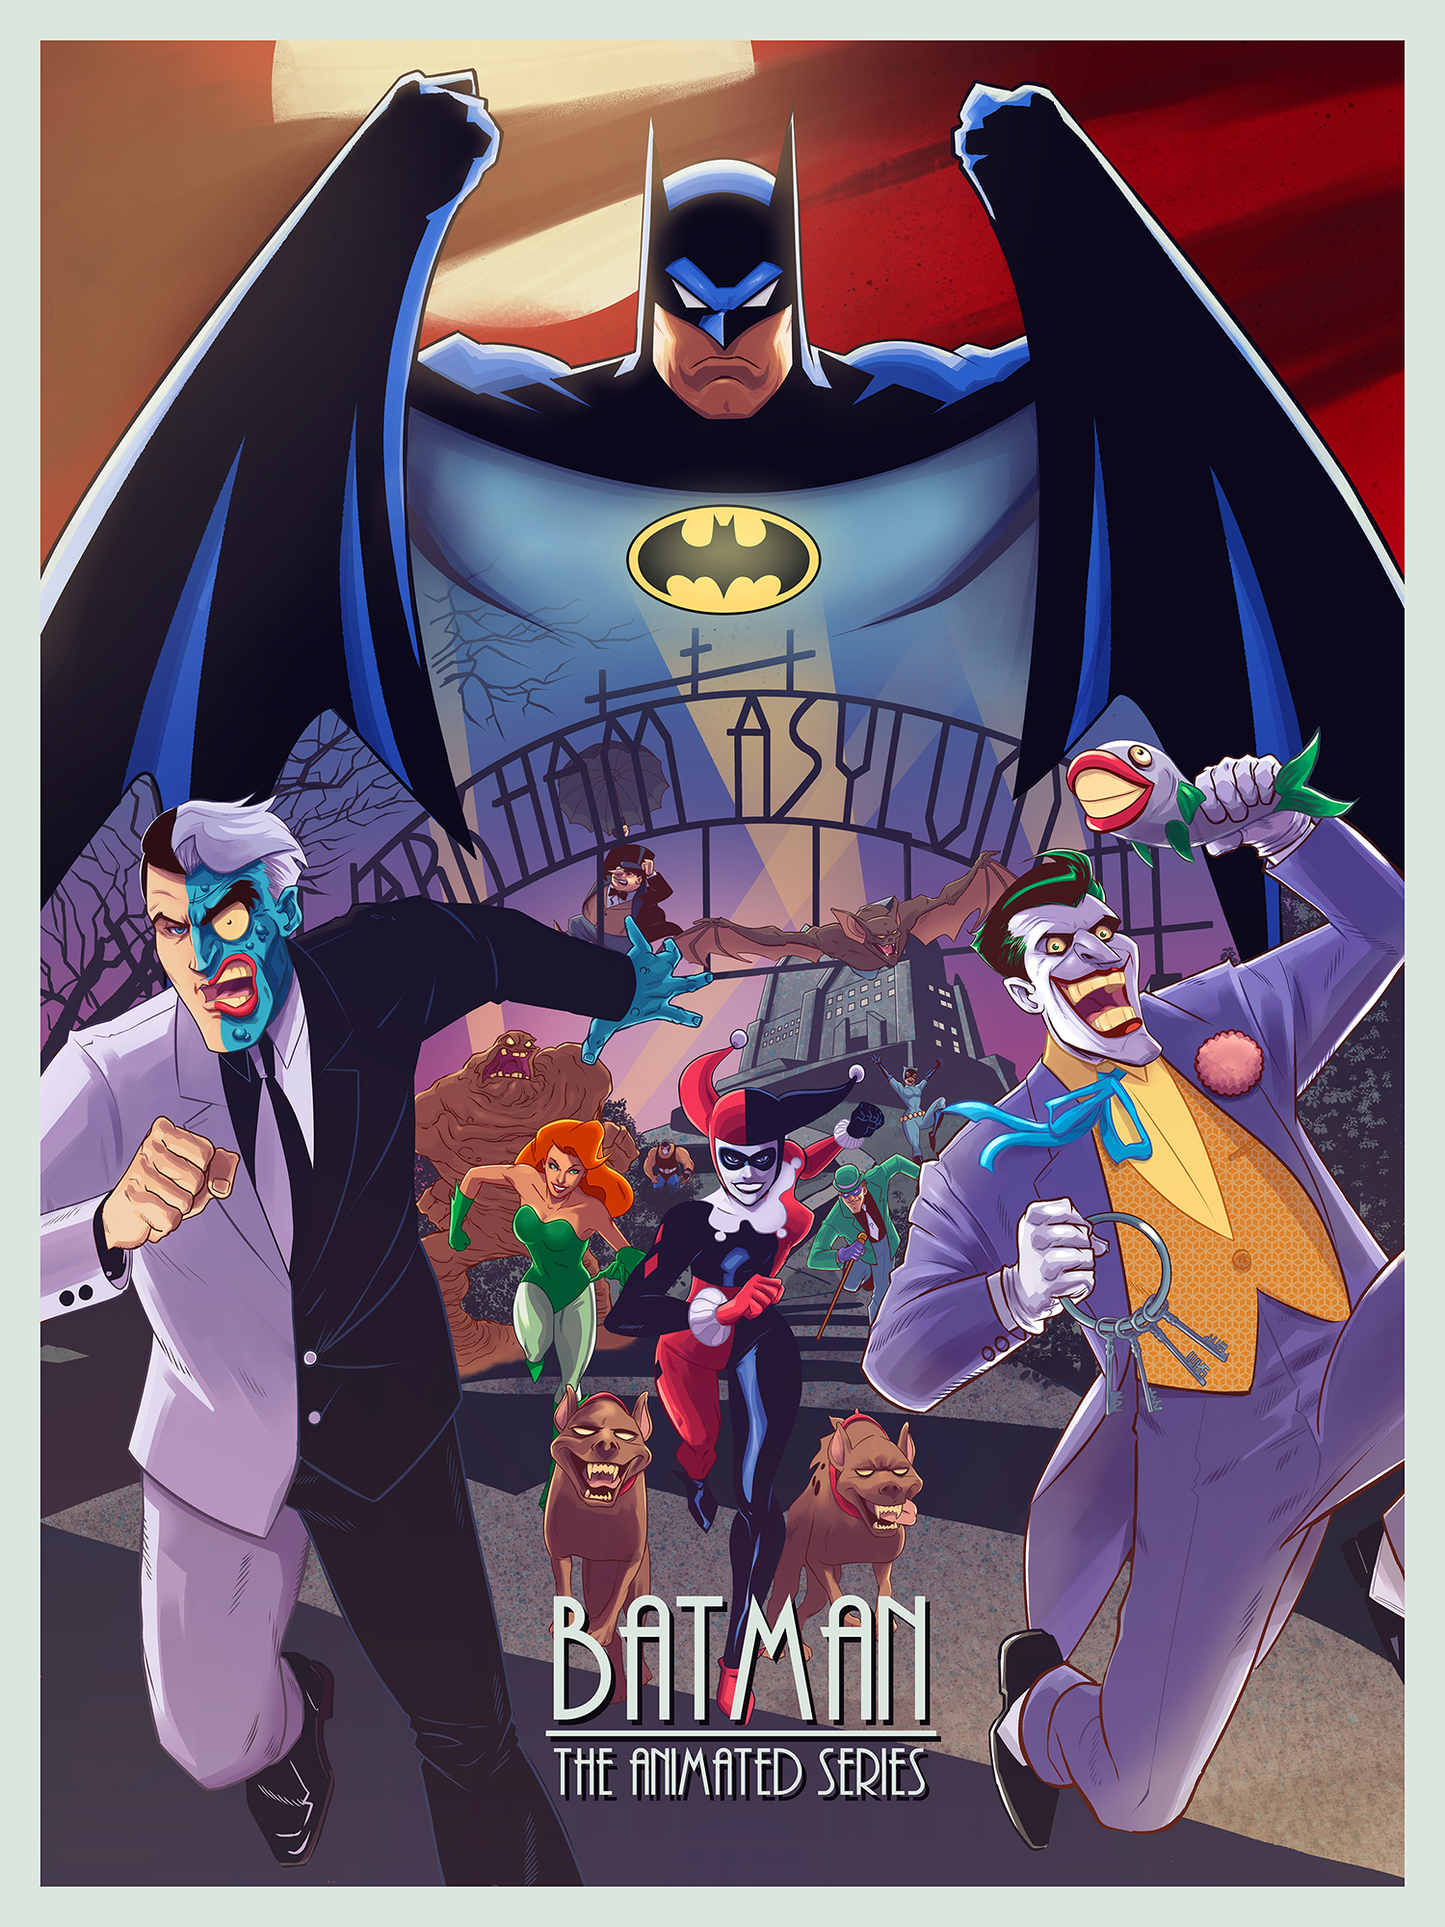 Mike McGee "Batman: The Animated Series"